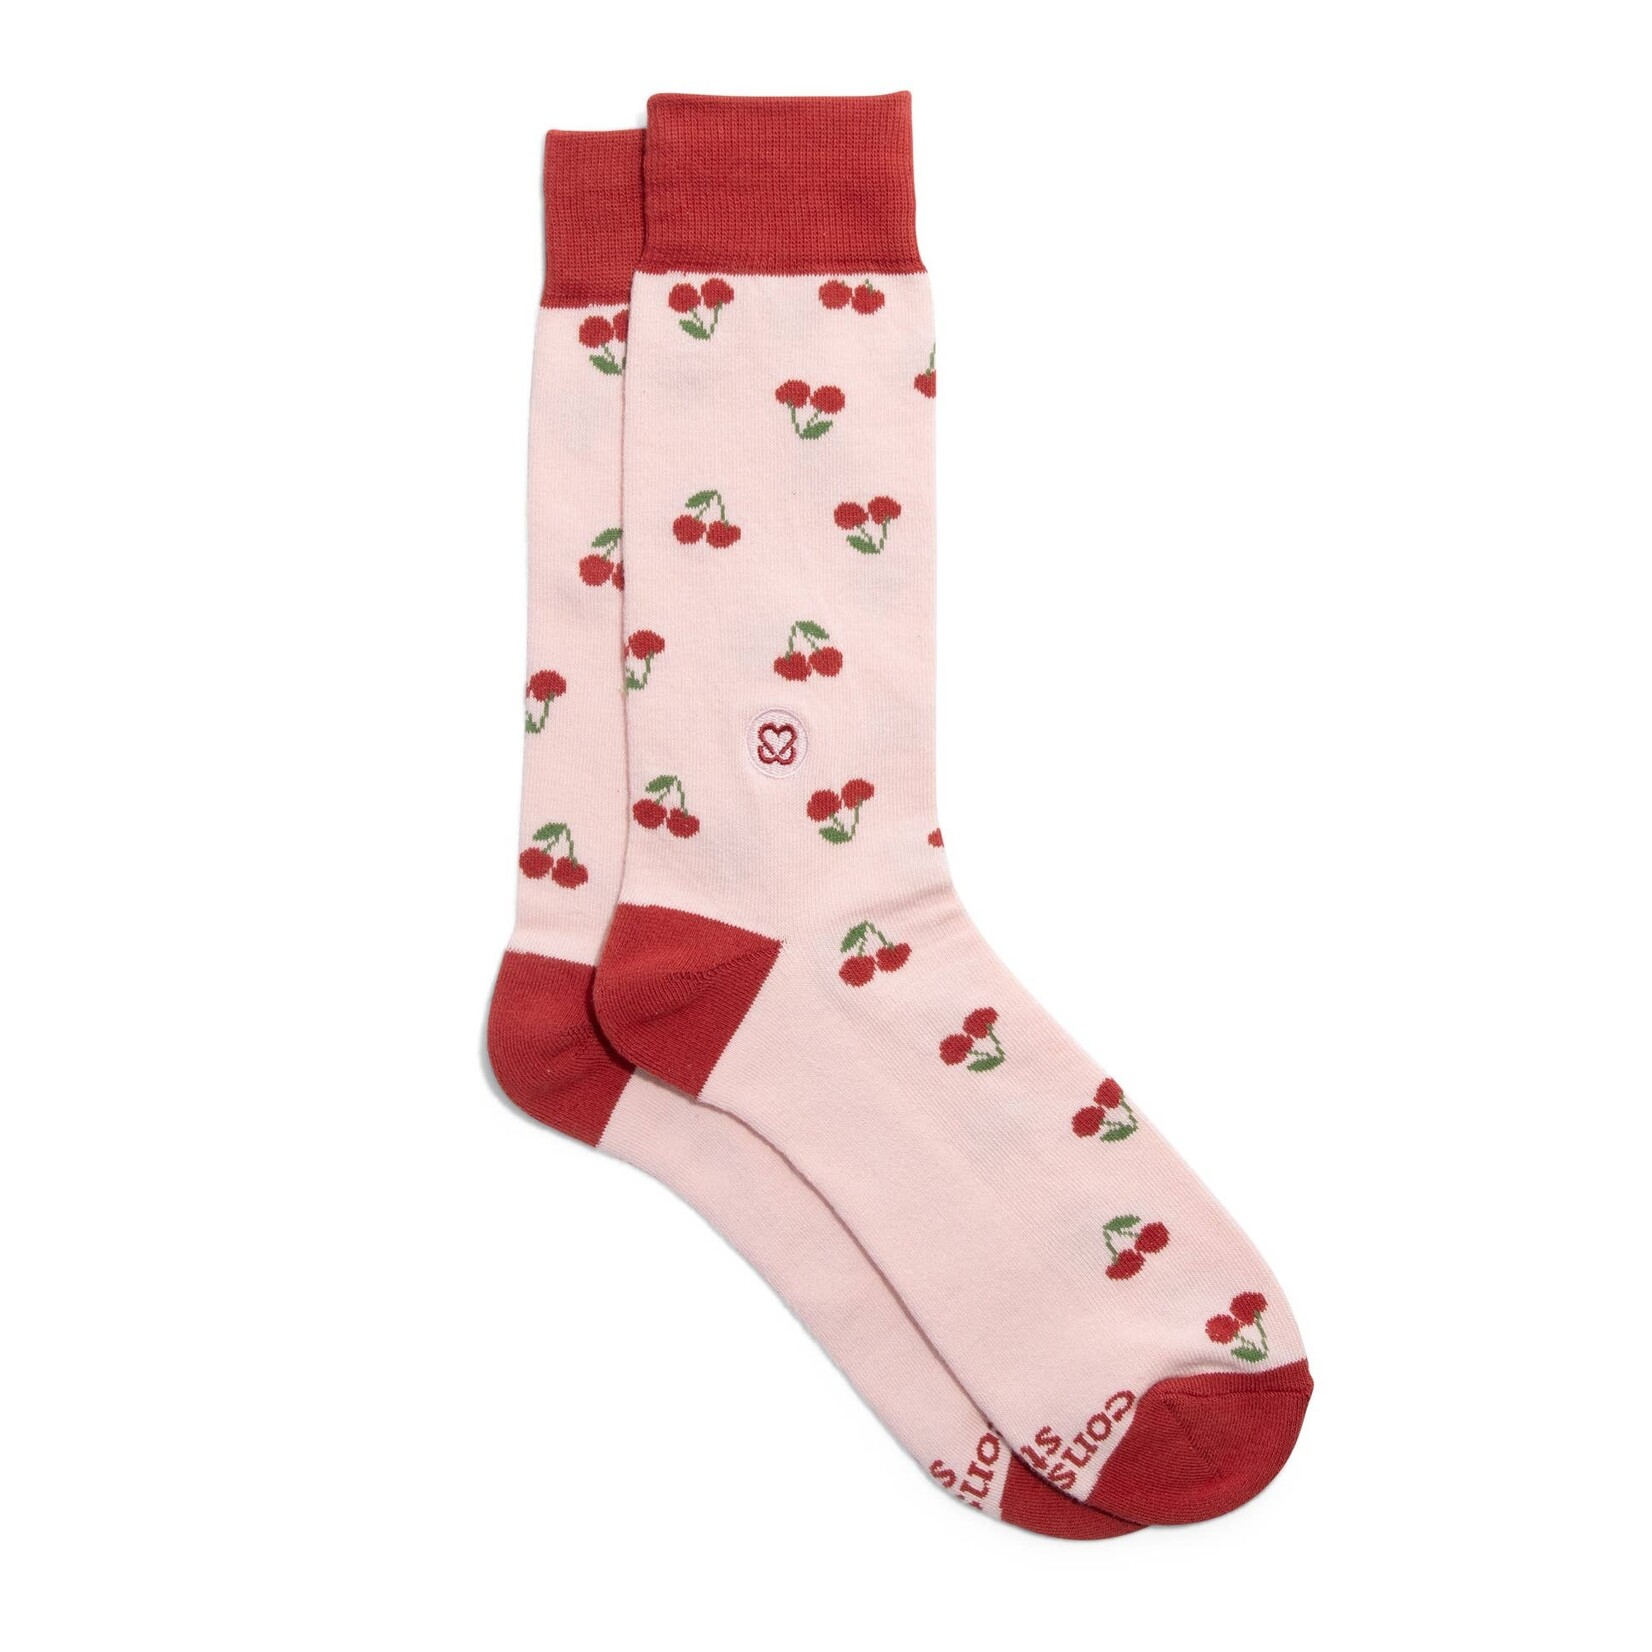 Conscious Step Socks that Support Self-Checks (Pink Cherries) SM